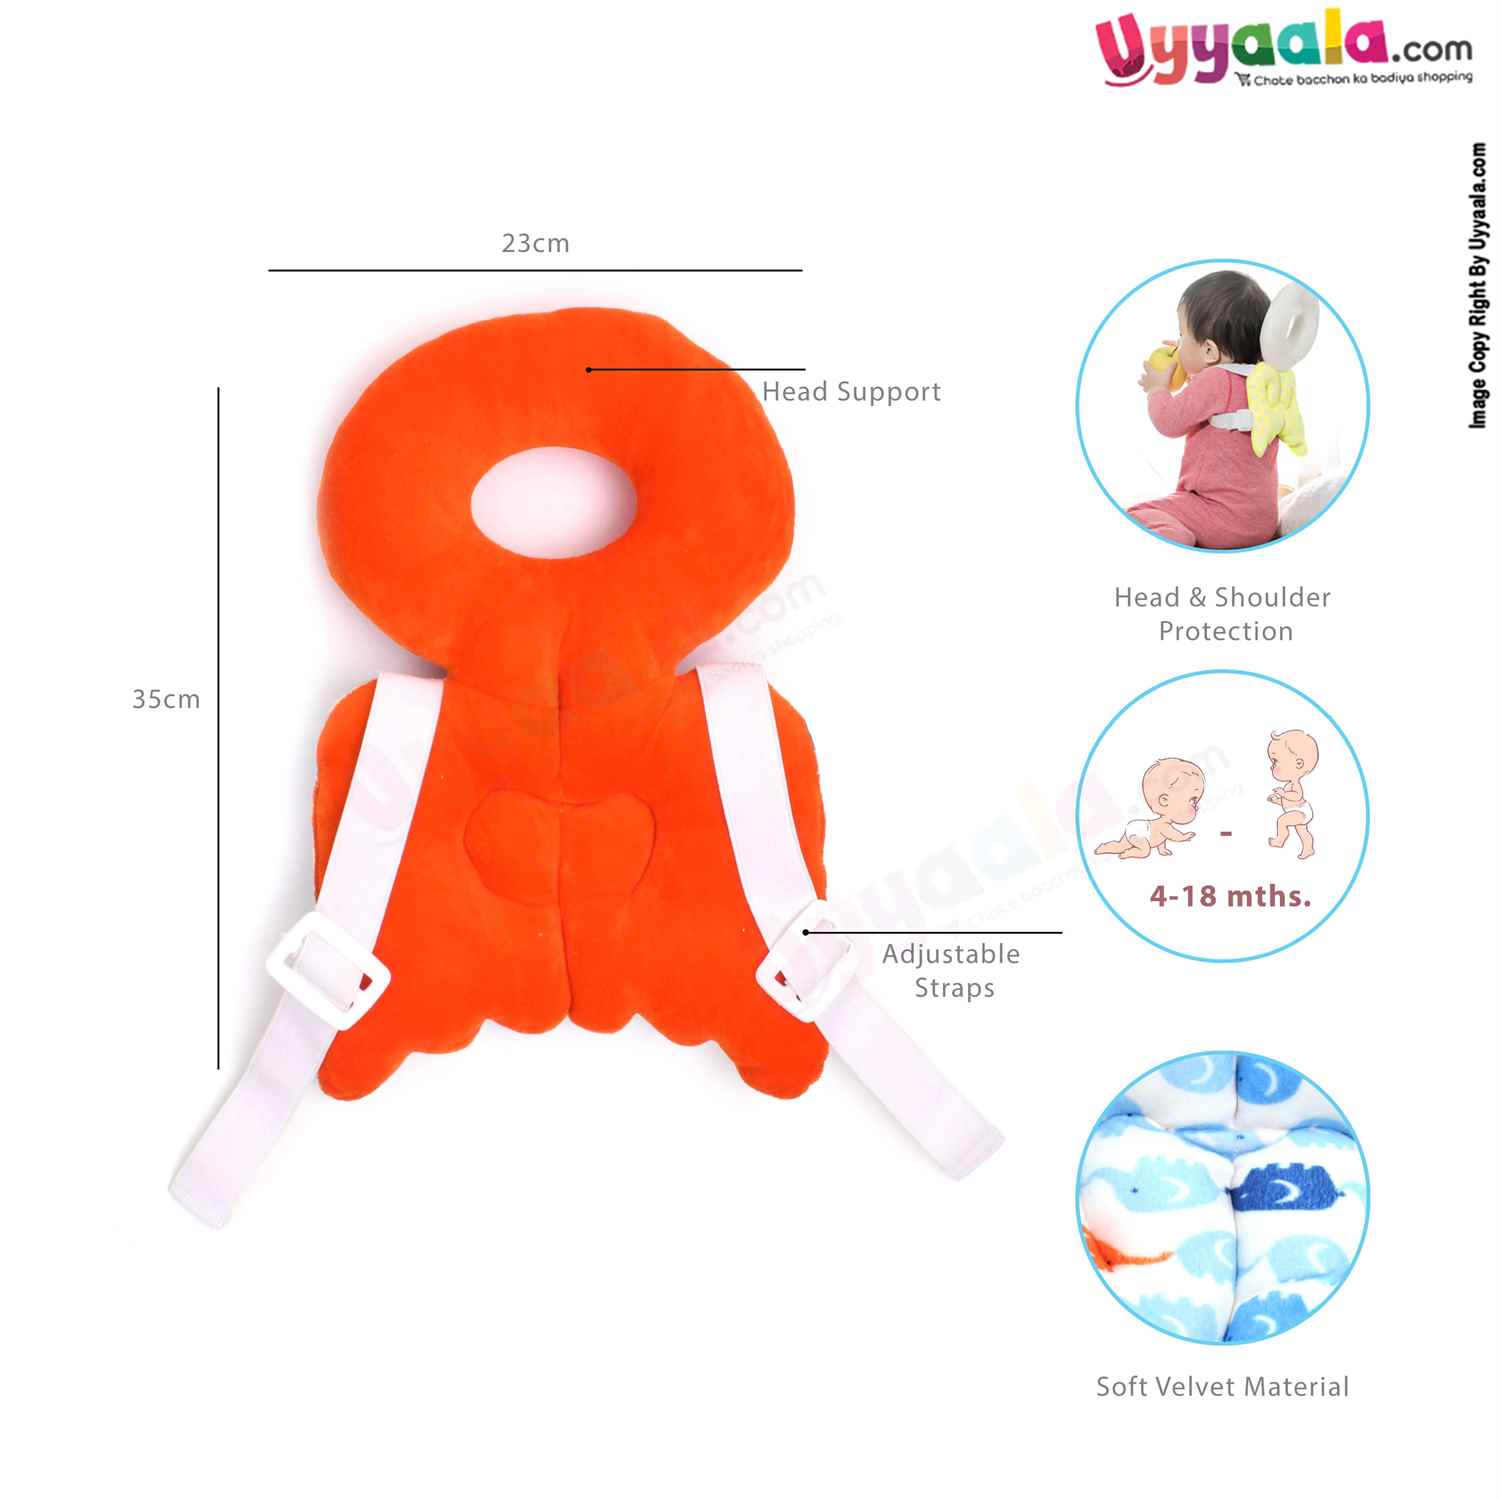 Head Protector with Pillow with Adjustable Straps for babies